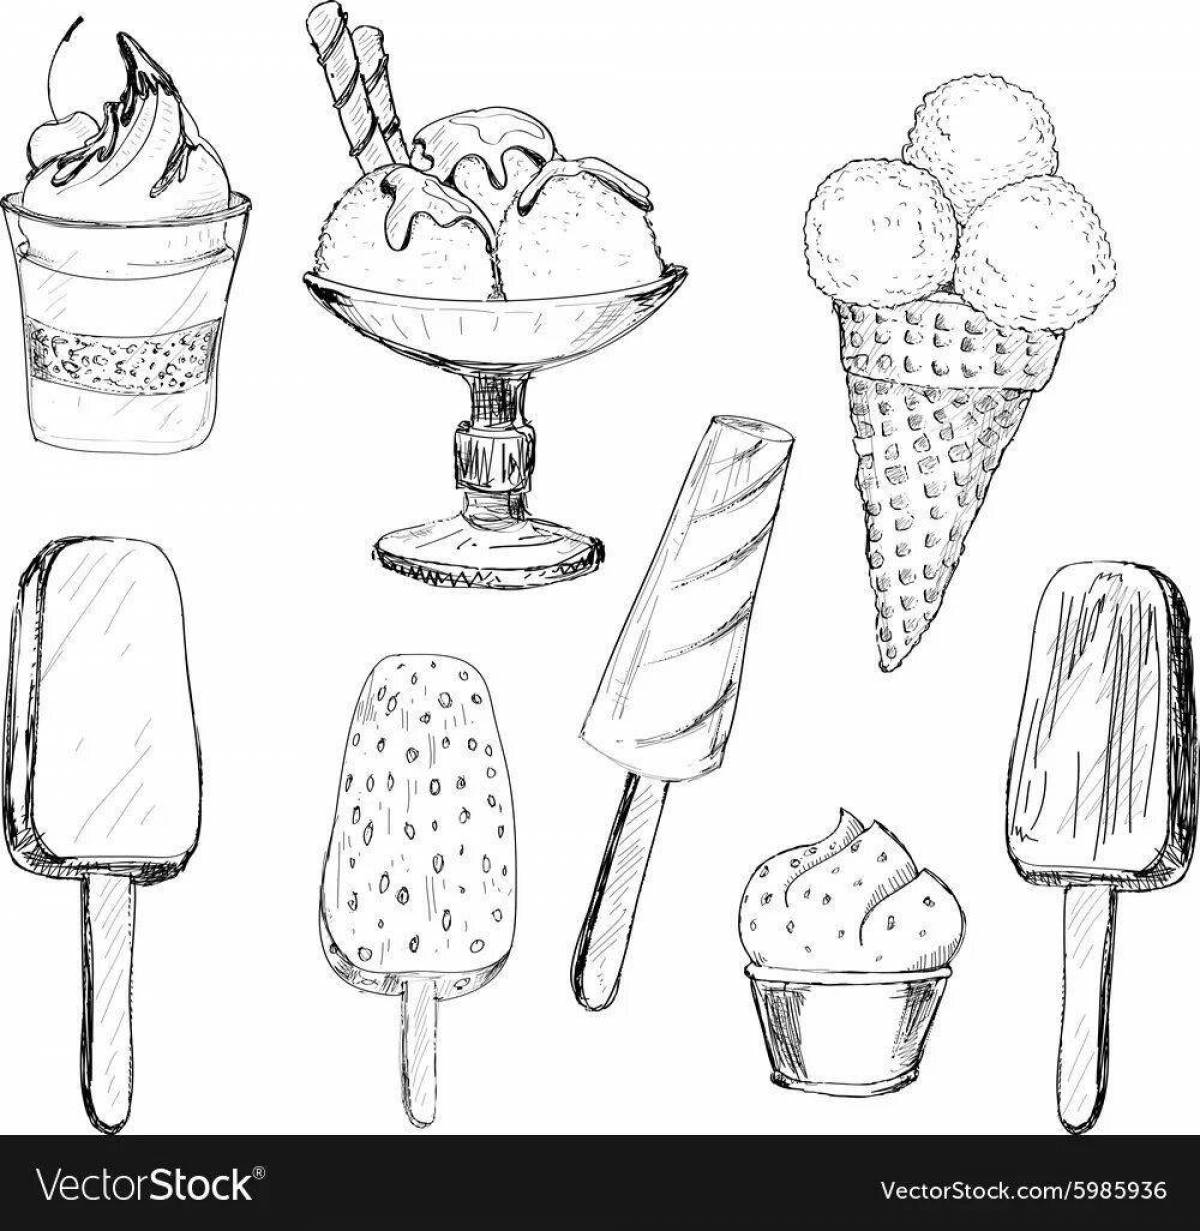 Lovely popsicle ice cream coloring page